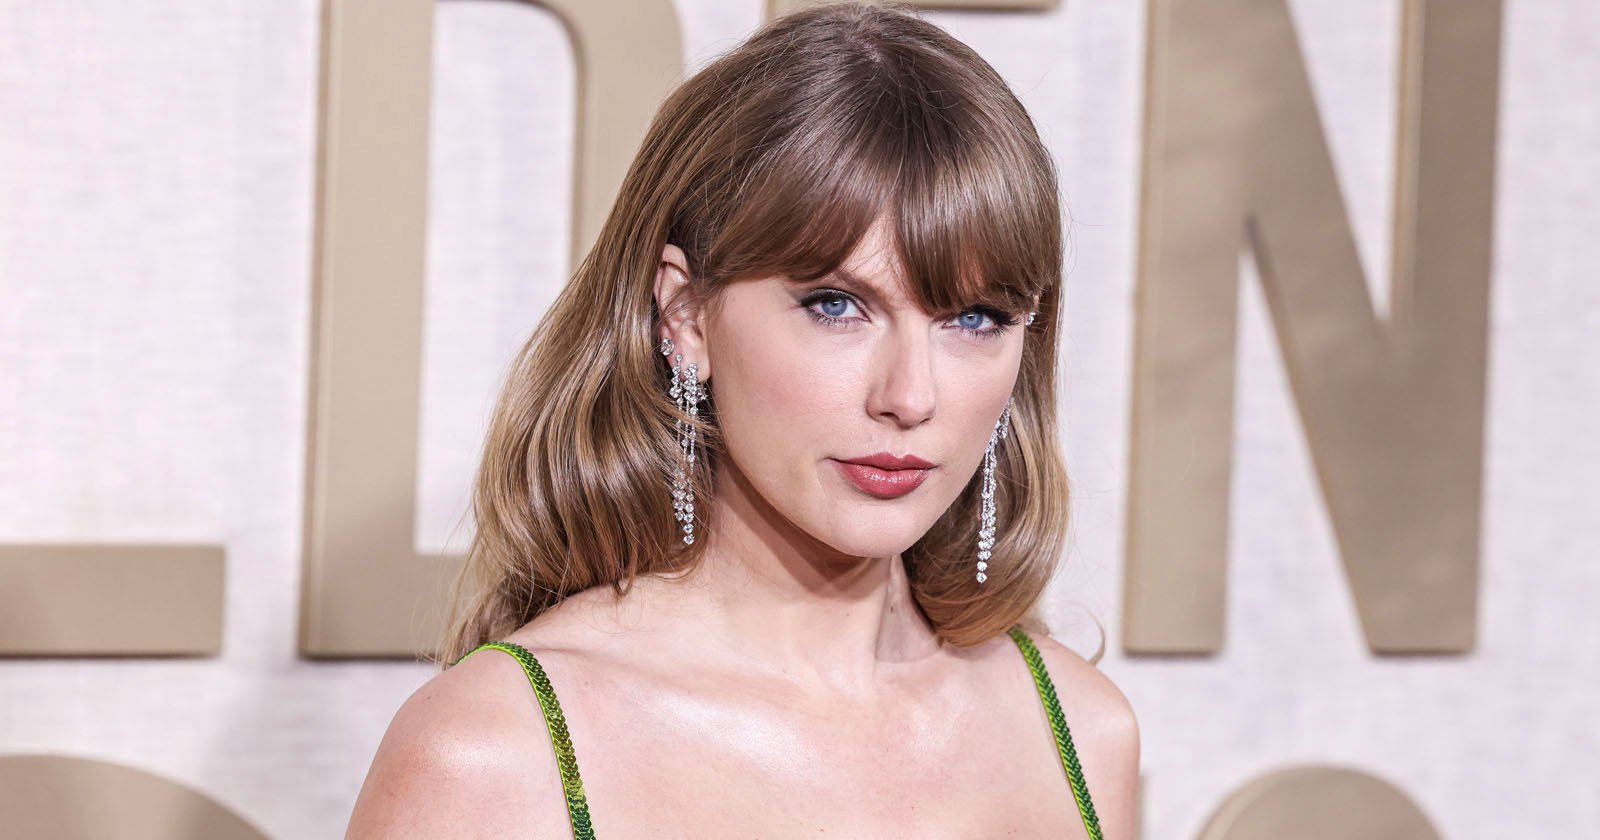 Taylor Swifts Dad Accused of Assaulting Photographer After Her Concert